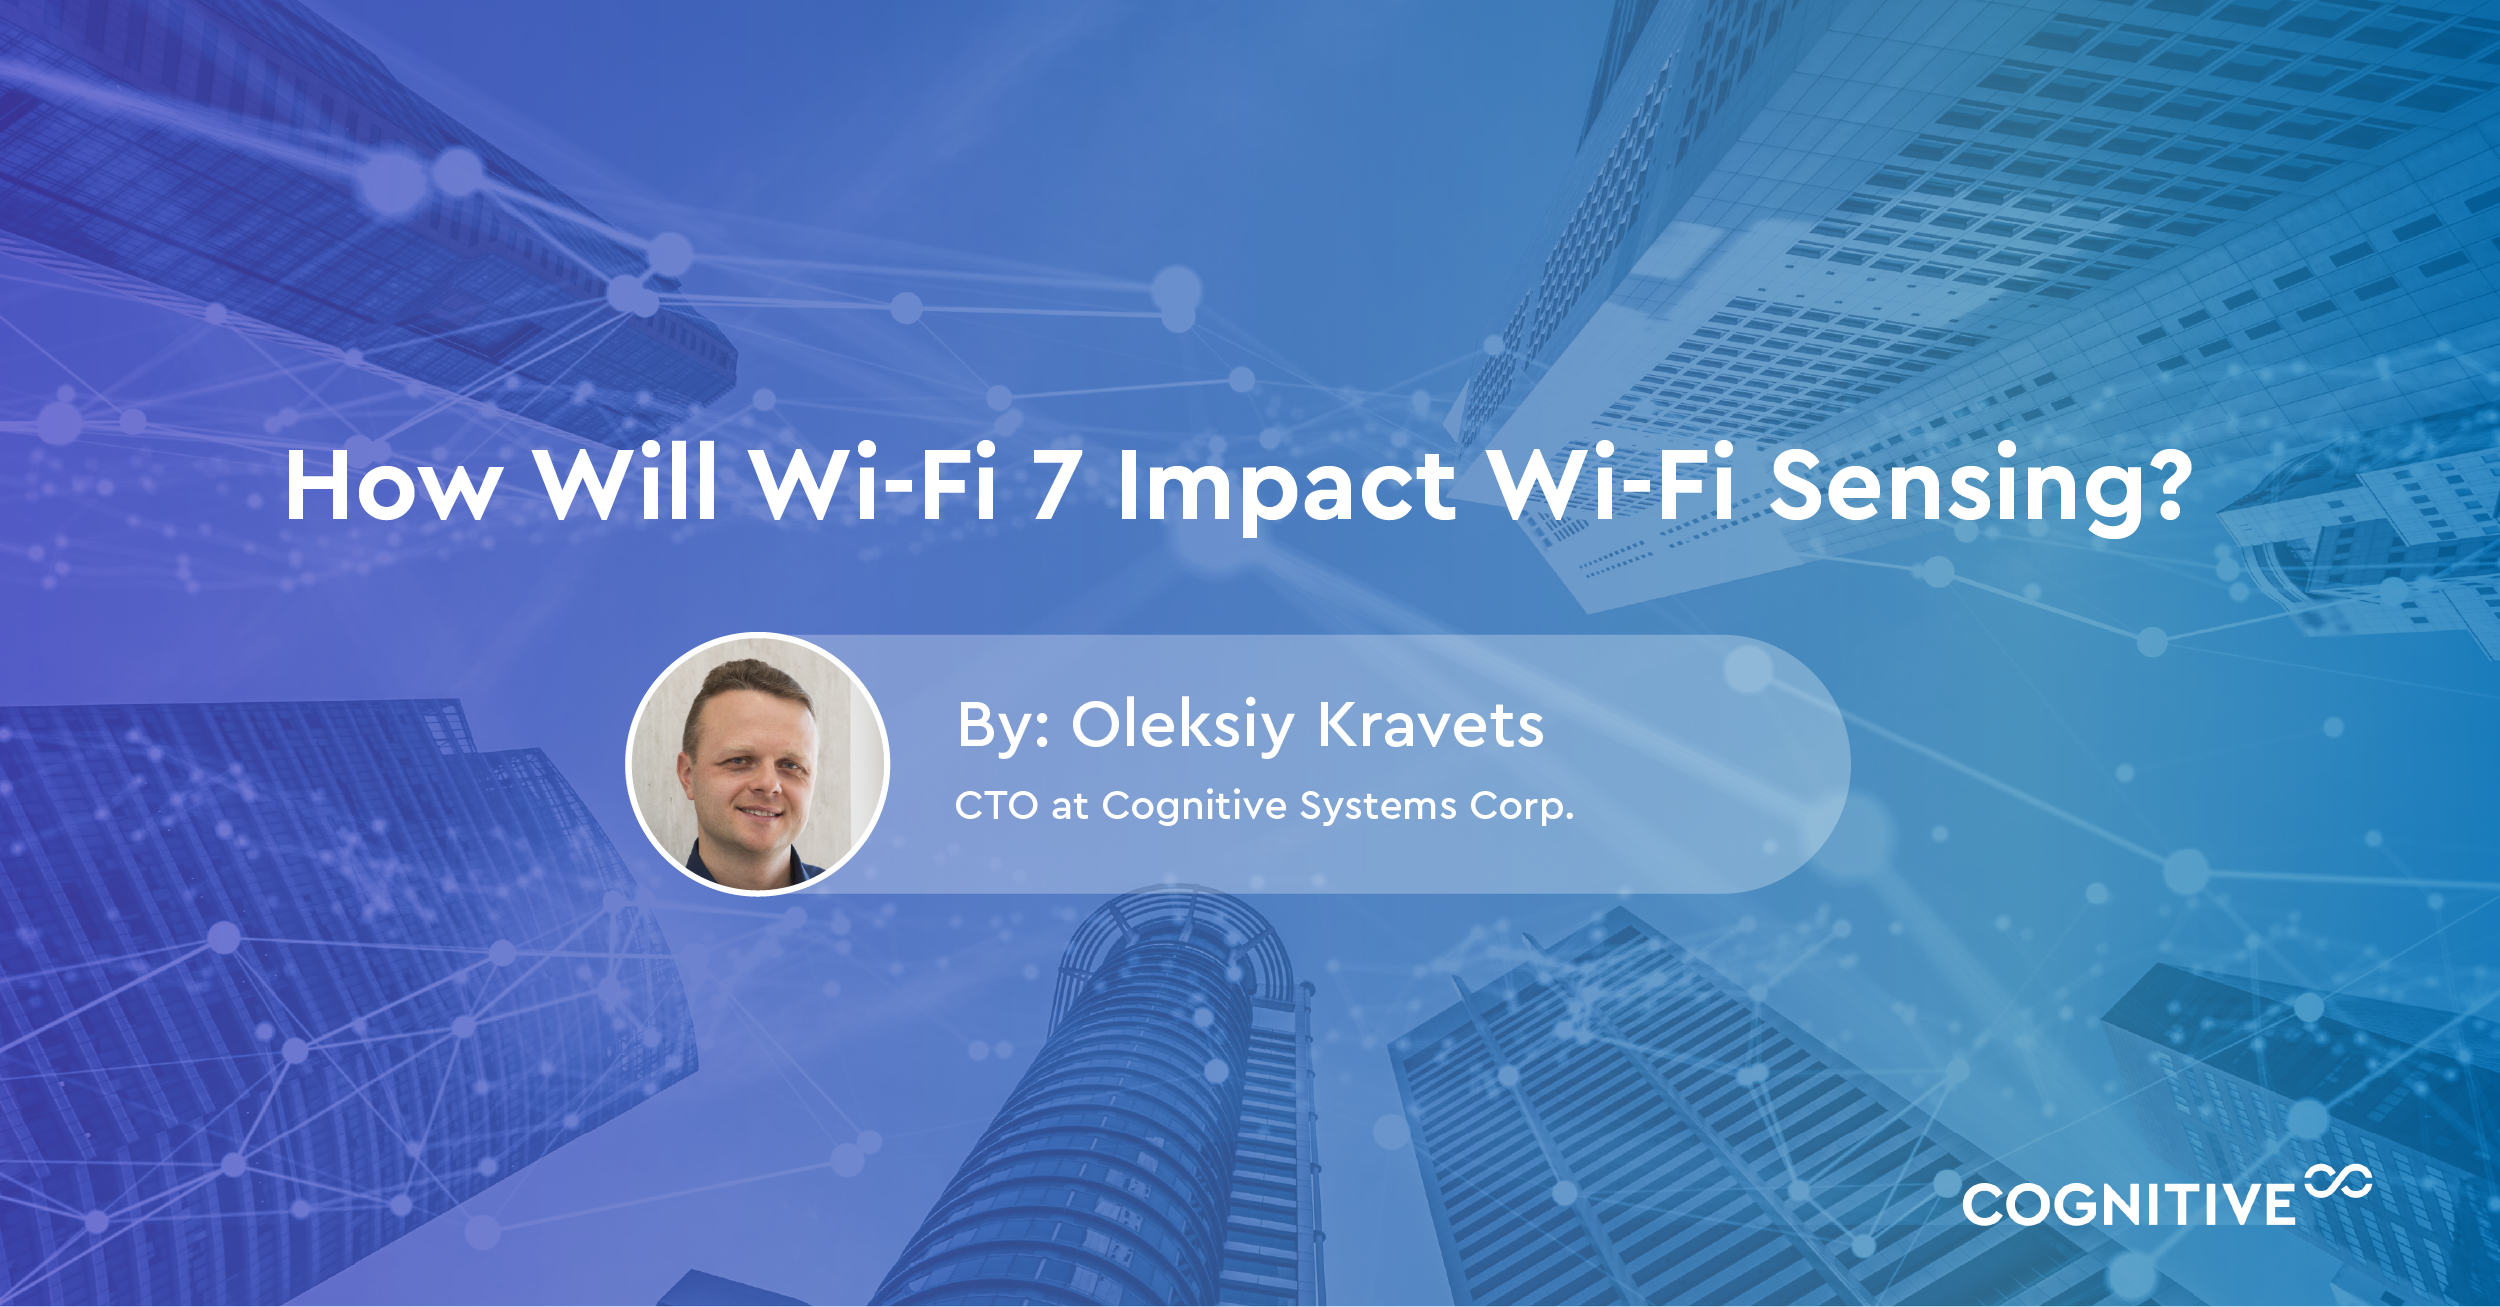 Headshot of Cognitive's CTO, Oleksiy Kravets, and the title of the blog: "How Will Wi-Fi 7 Impact Wi-Fi Sensing?"